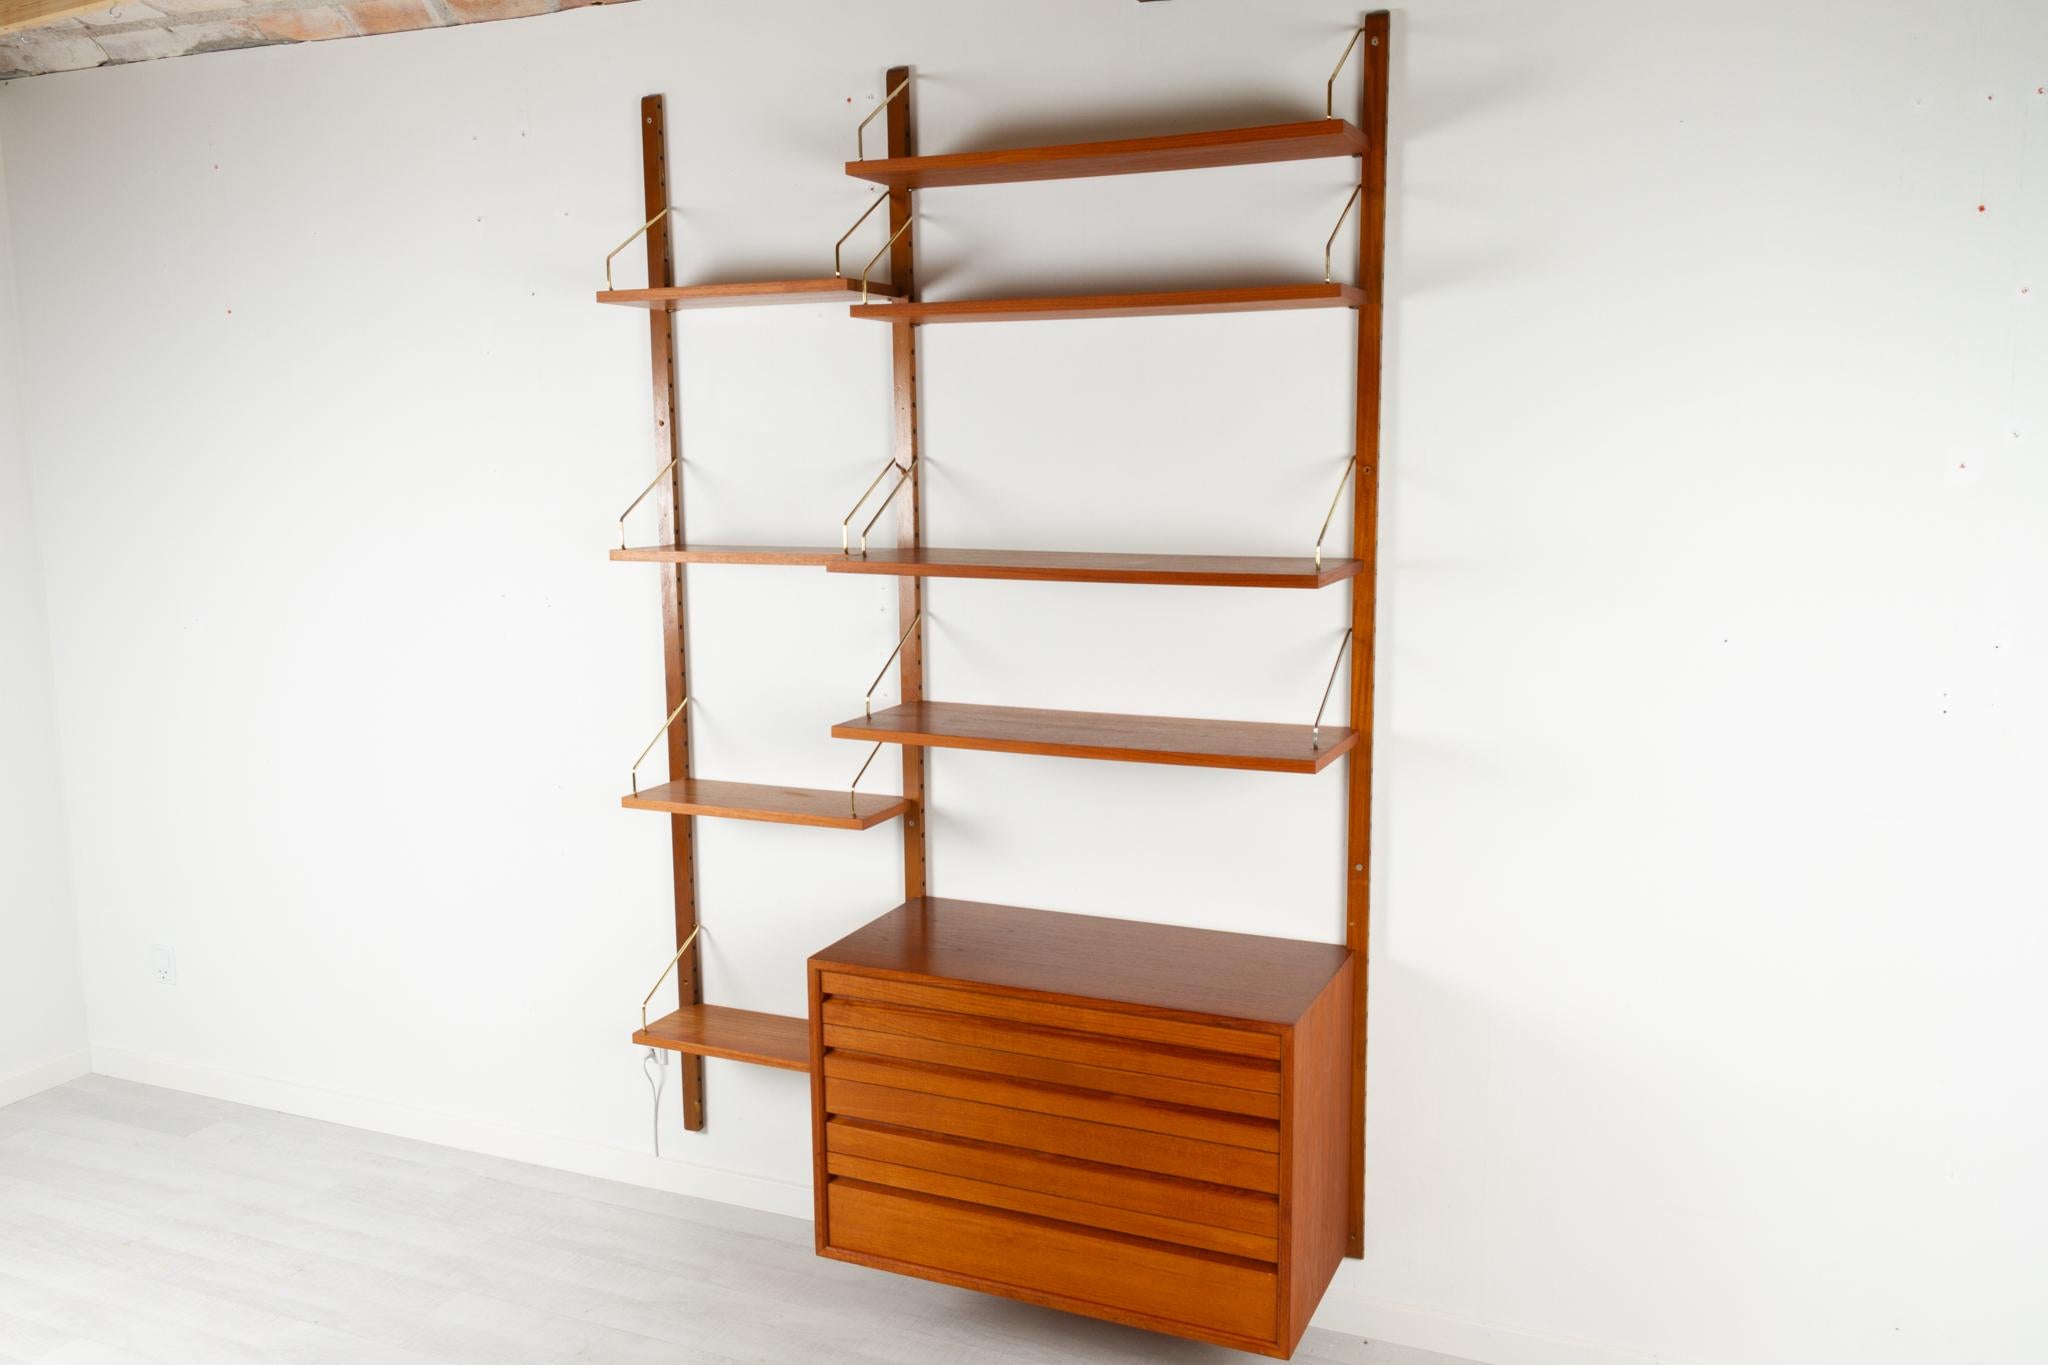 Vintage Danish teak wall unit by Poul Cadovius for Cado, 1960s.

Mid-Century Modern 2 bay shelving system model Royal. This is a original vintage floating bookcase designed in 1948 by Danish architect Poul Cadovius. 
Cadovius had the revolutionary